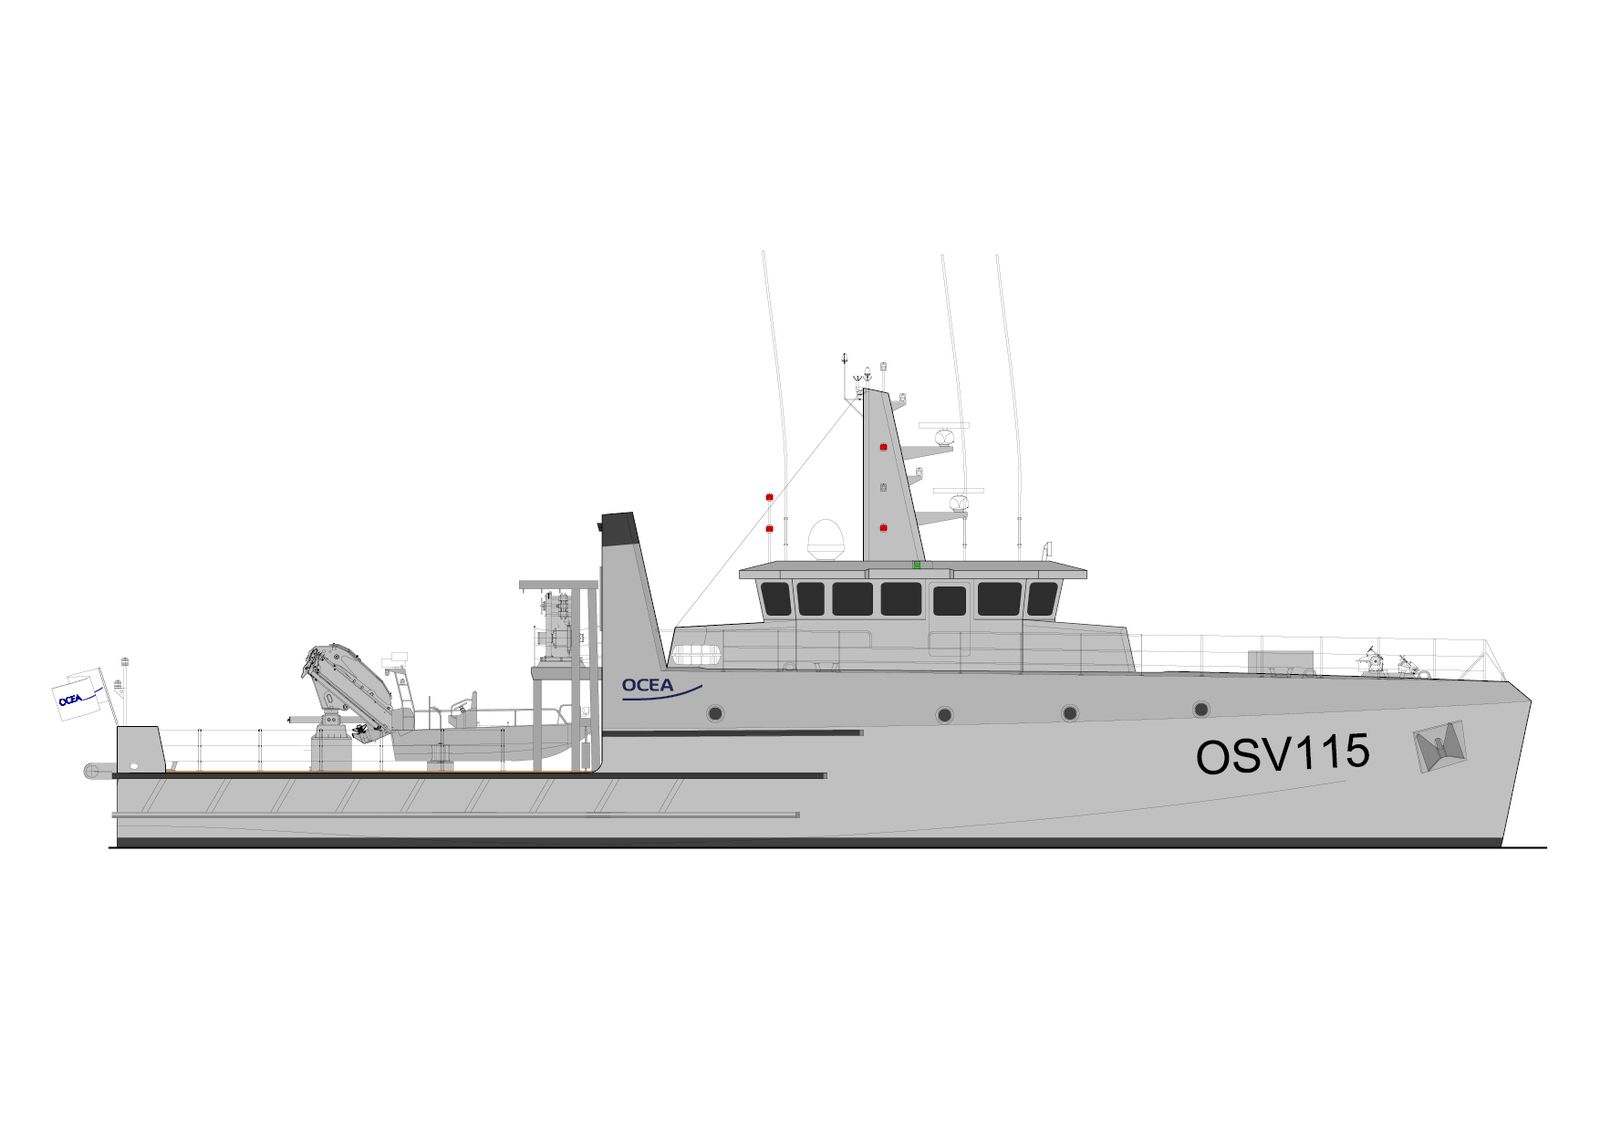 New order for an OCEA survey vessel for Nigeria